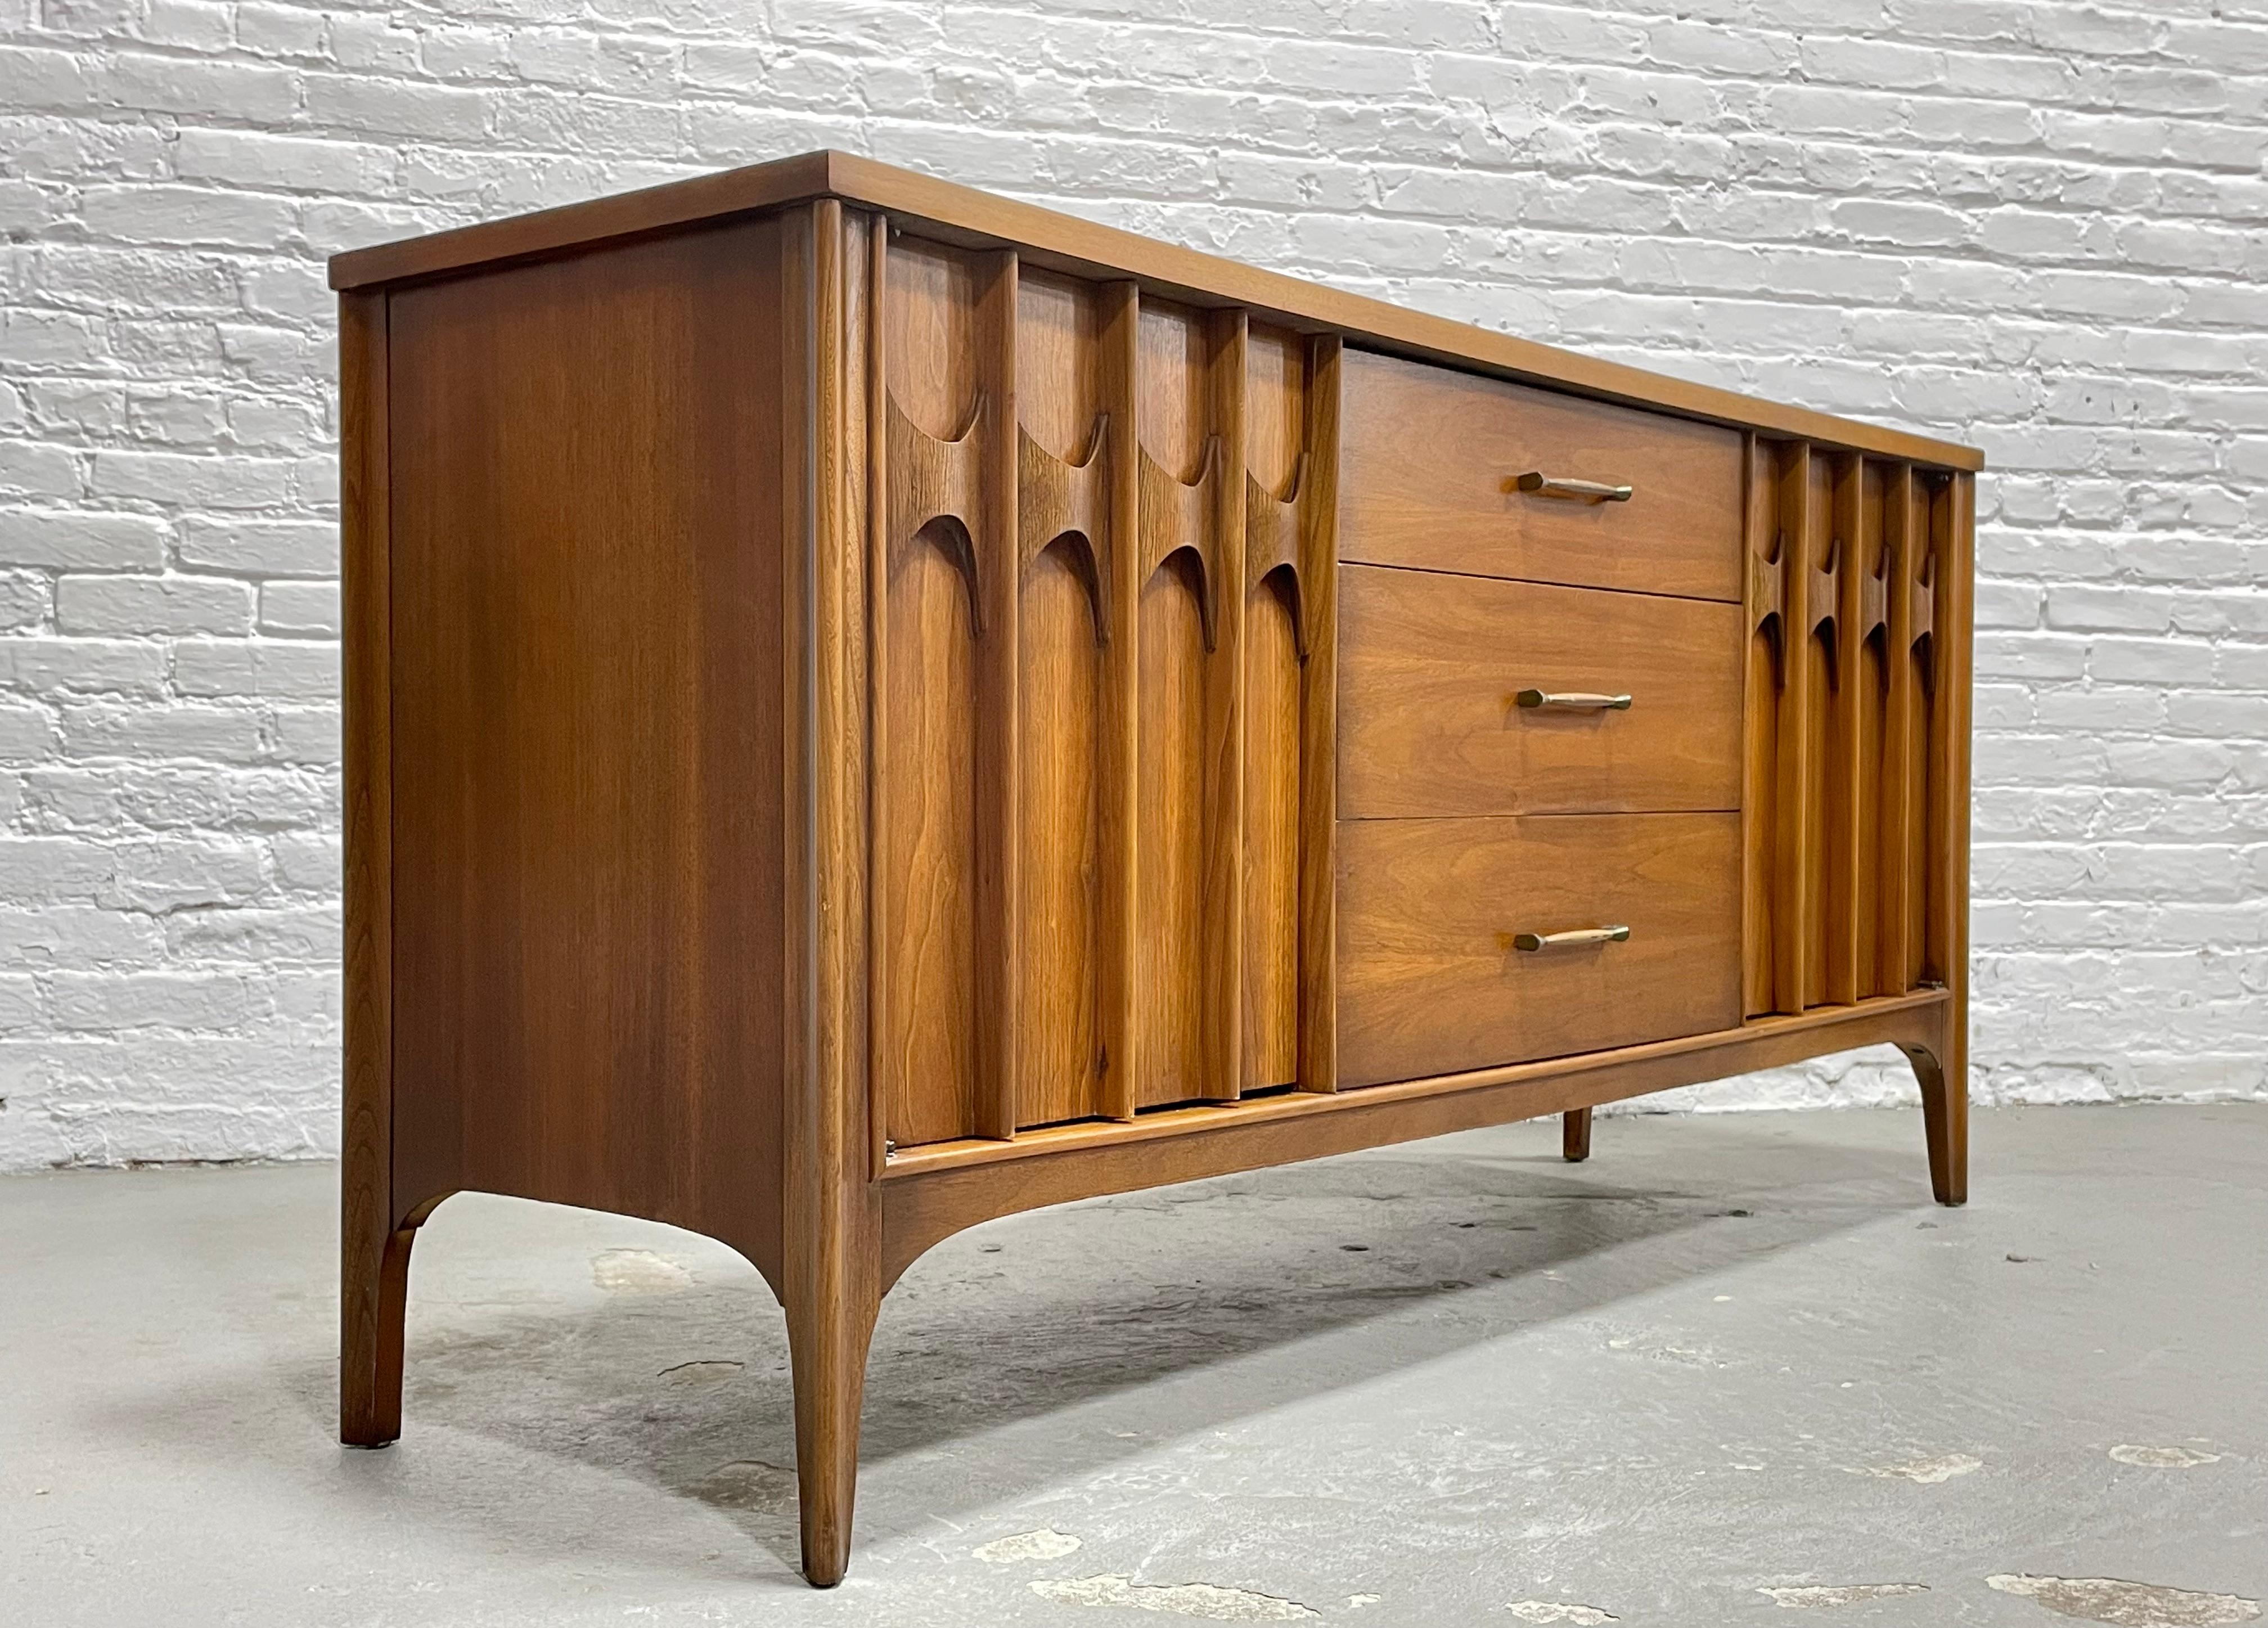 Sculpted Mid Century Modern Credenza / Long Dresser by Kent Coffey's Perspecta line, c. 1960's. This fabulous piece features three deep and spacious drawers at the center and a shelving area along either side. The credenza is crafted from gorgeous